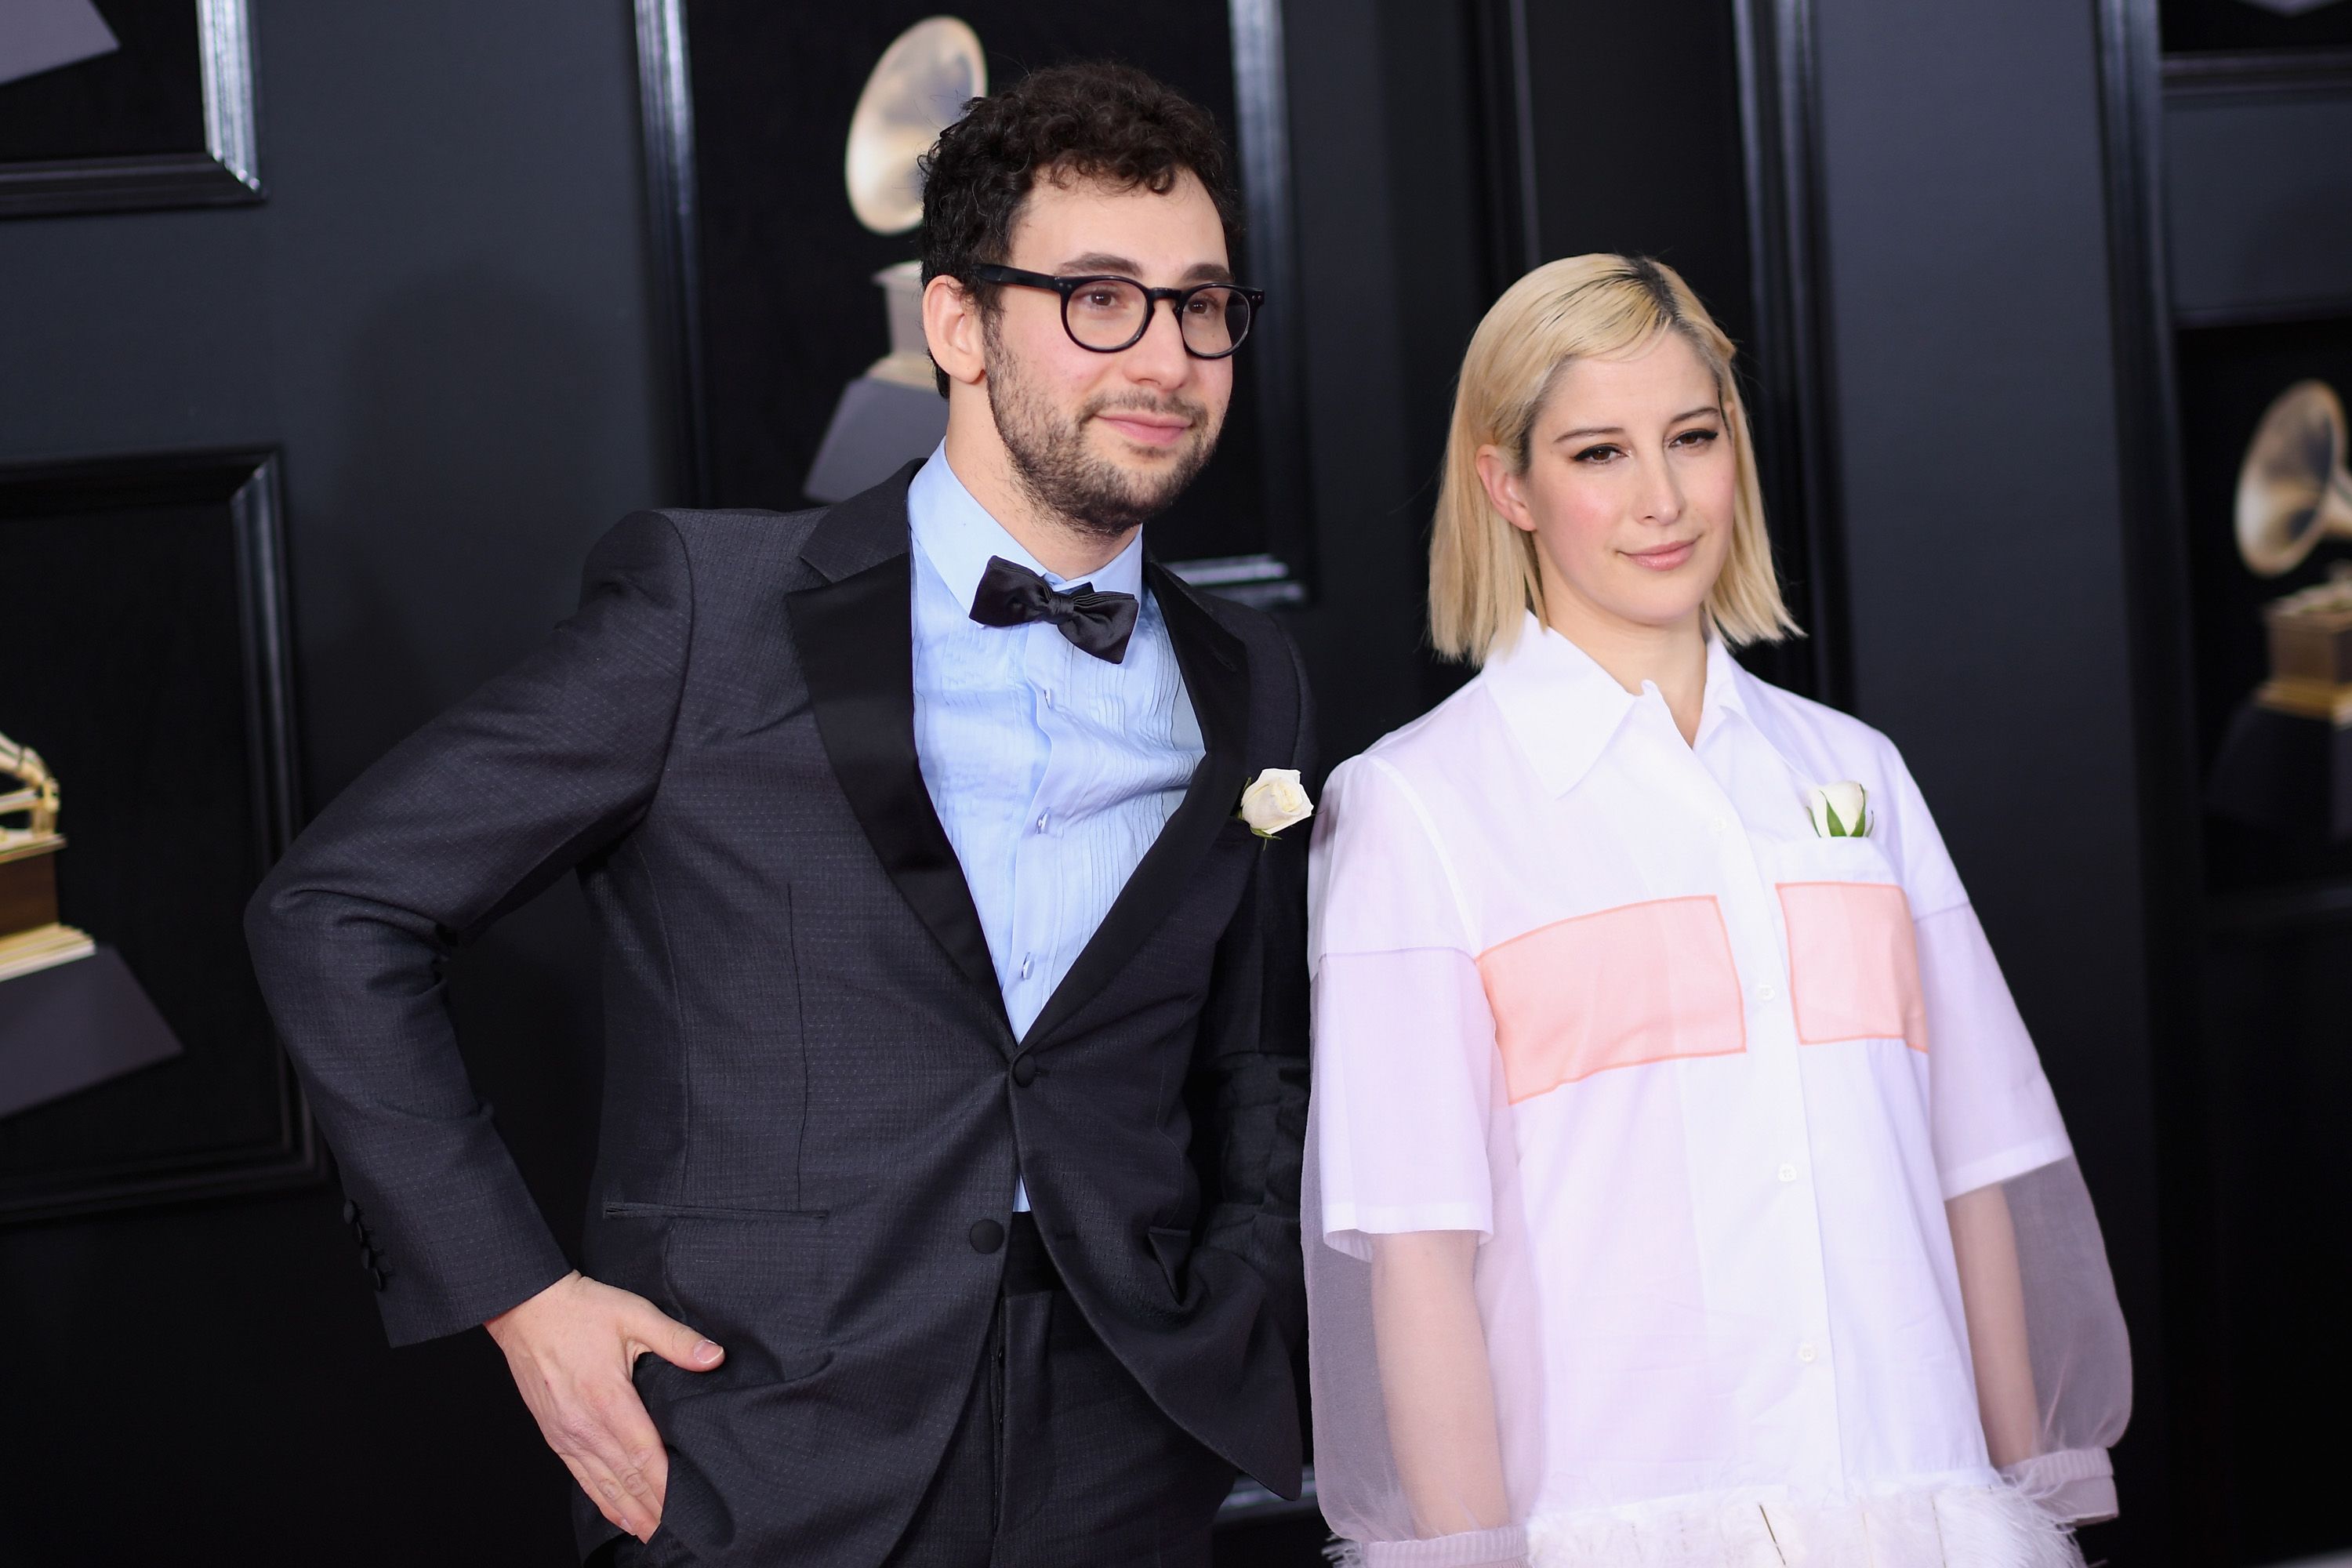 Jack Antonoff and Rachel Antonoff during the 60th Annual GRAMMY Awards at Madison Square Garden on January 28, 2018, in New York City. | Source: Getty Images